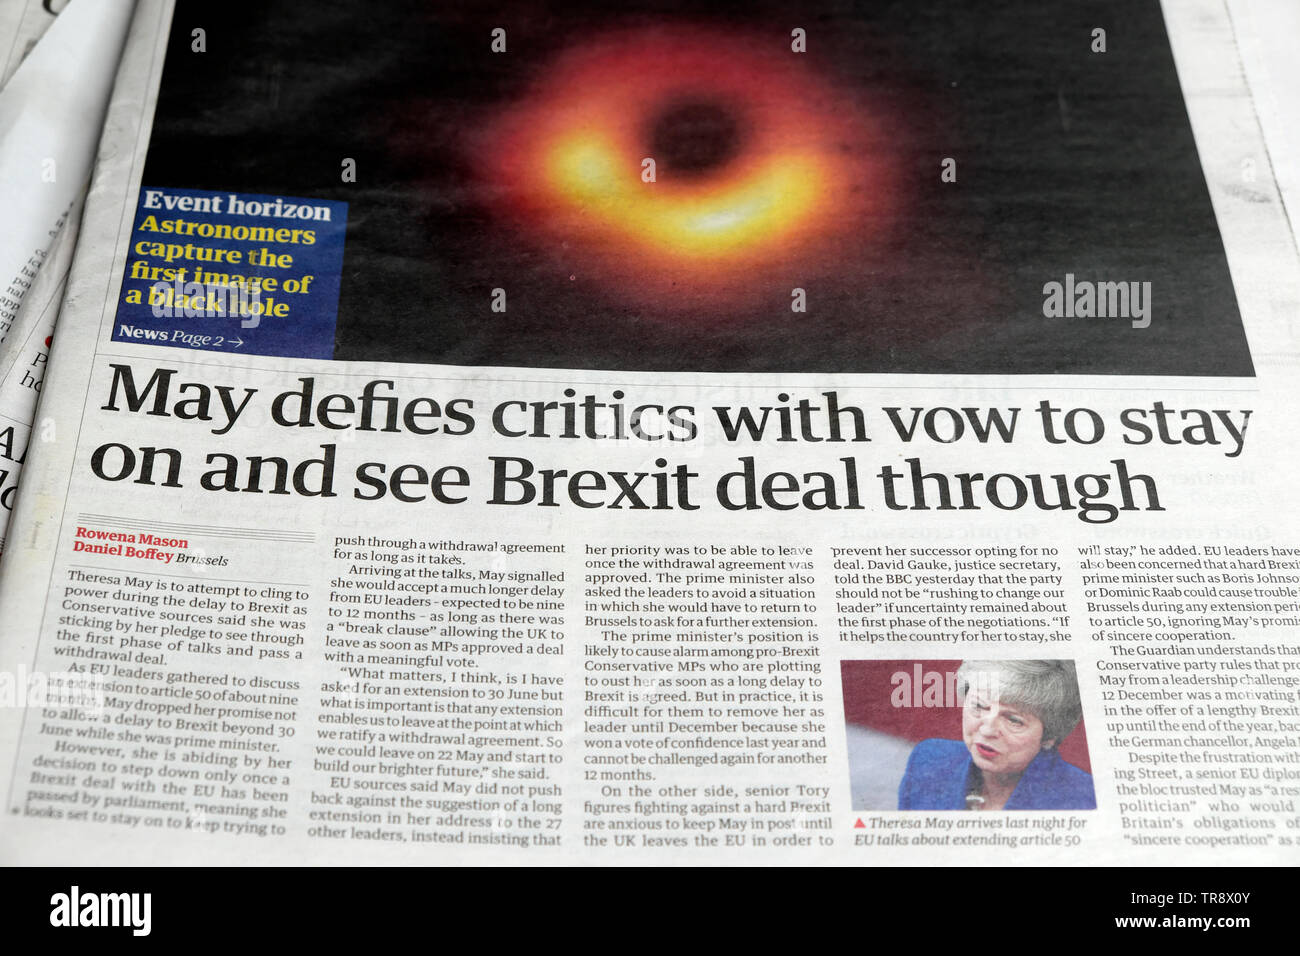 'May defies critics with vow to stay on and see Brexit deal through' Theresa May British newspaper article headline juxtaposed with first photo of black hole in space by astronomers in London UK Europe EU 10 April 2019 Stock Photo